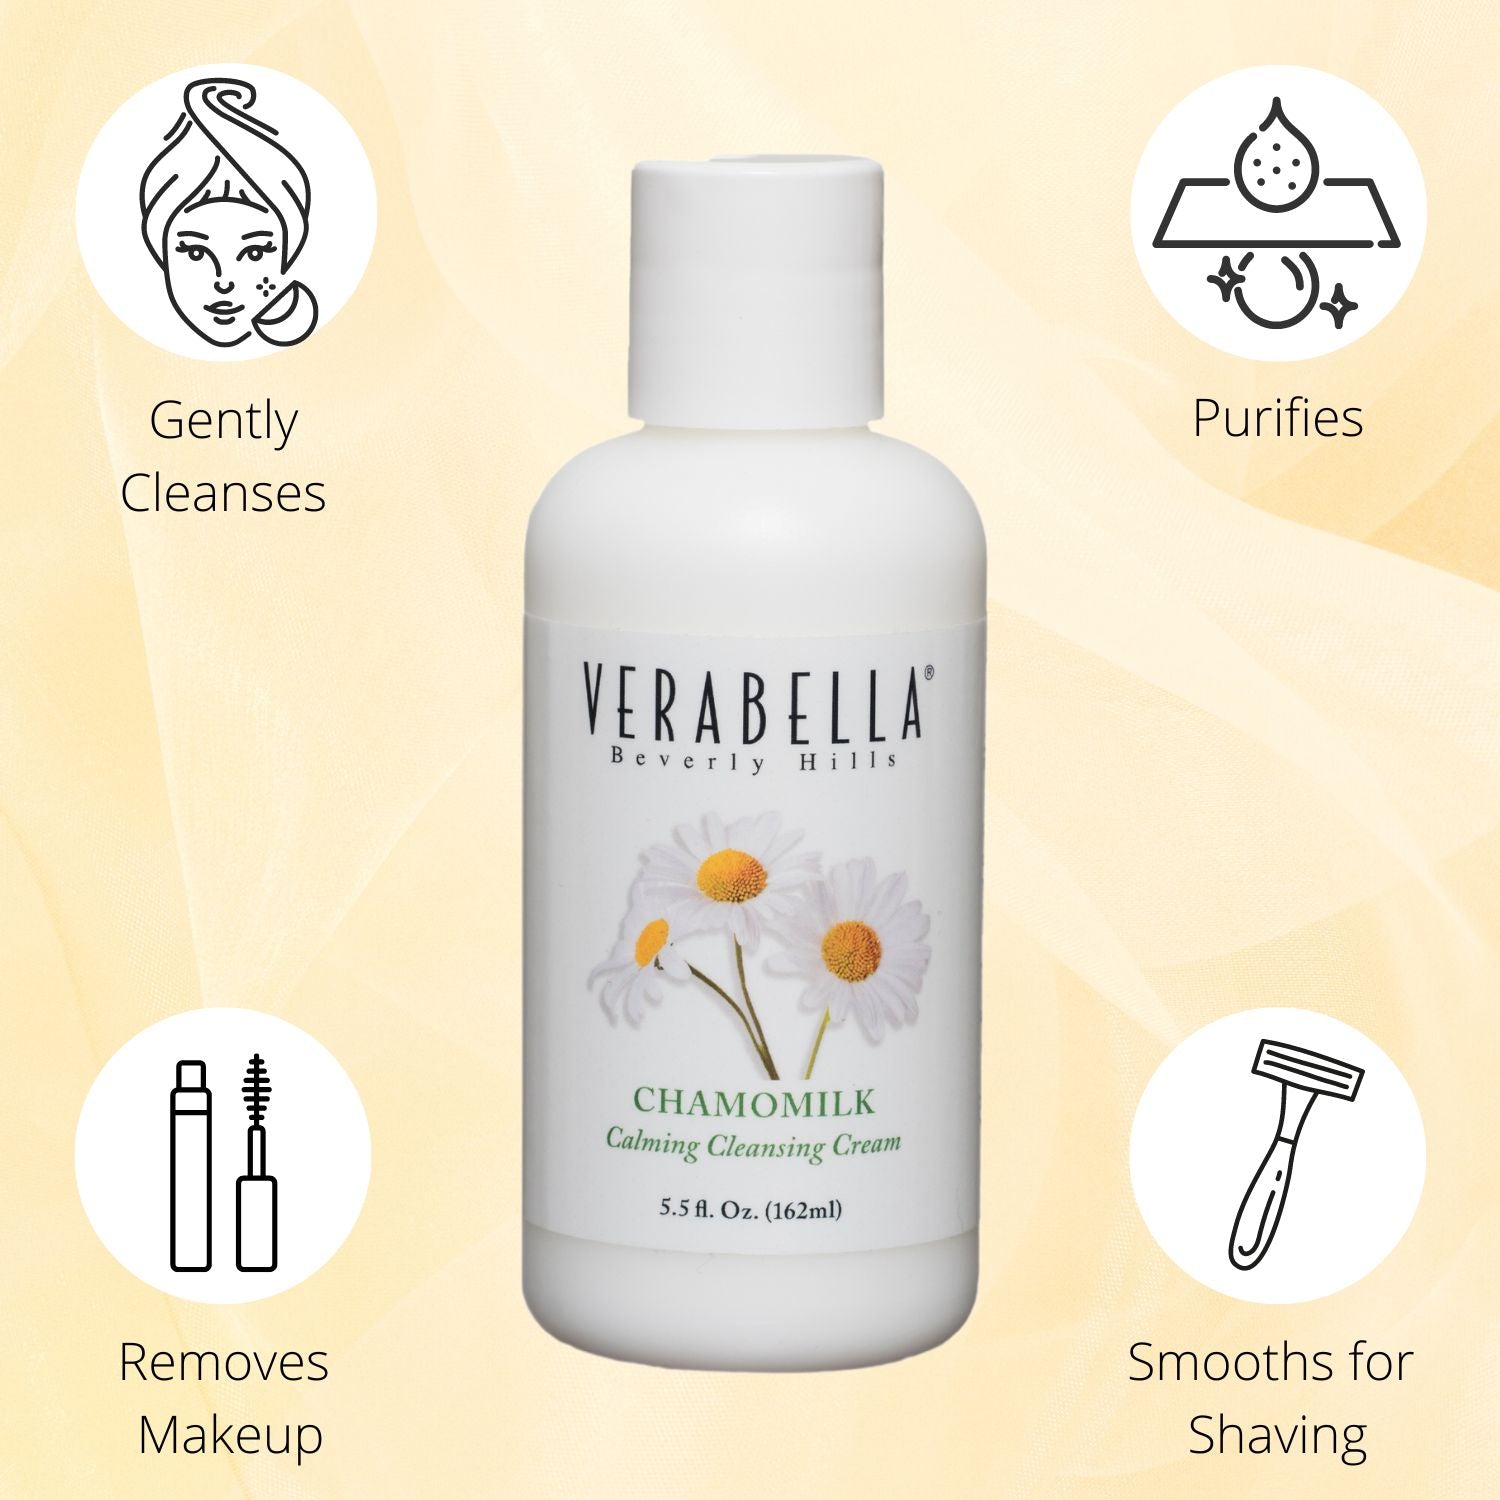 Verabella Chamomilk Calming Cleansing Cream purifies and gently cleanses